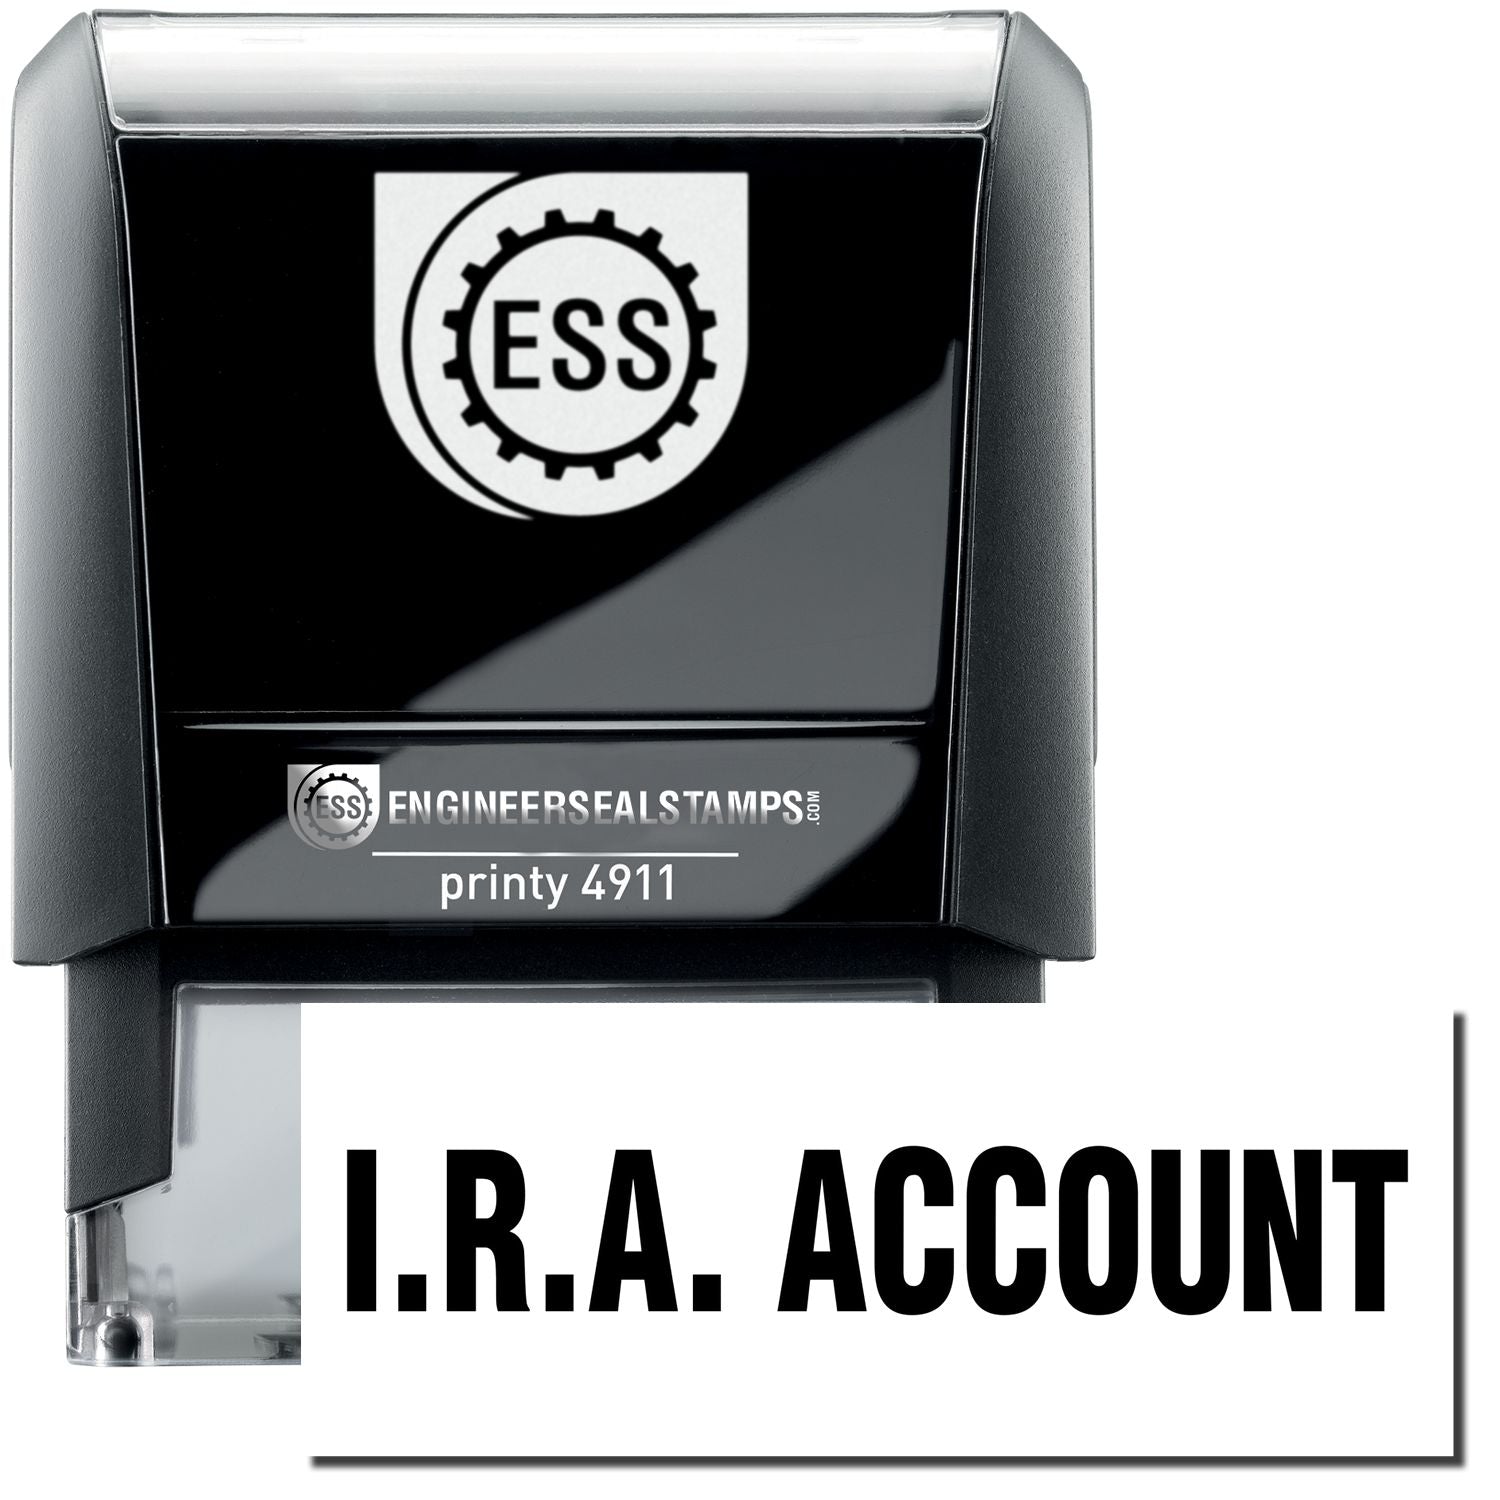 A self-inking stamp with a stamped image showing how the text "I.R.A. ACCOUNT" is displayed after stamping.